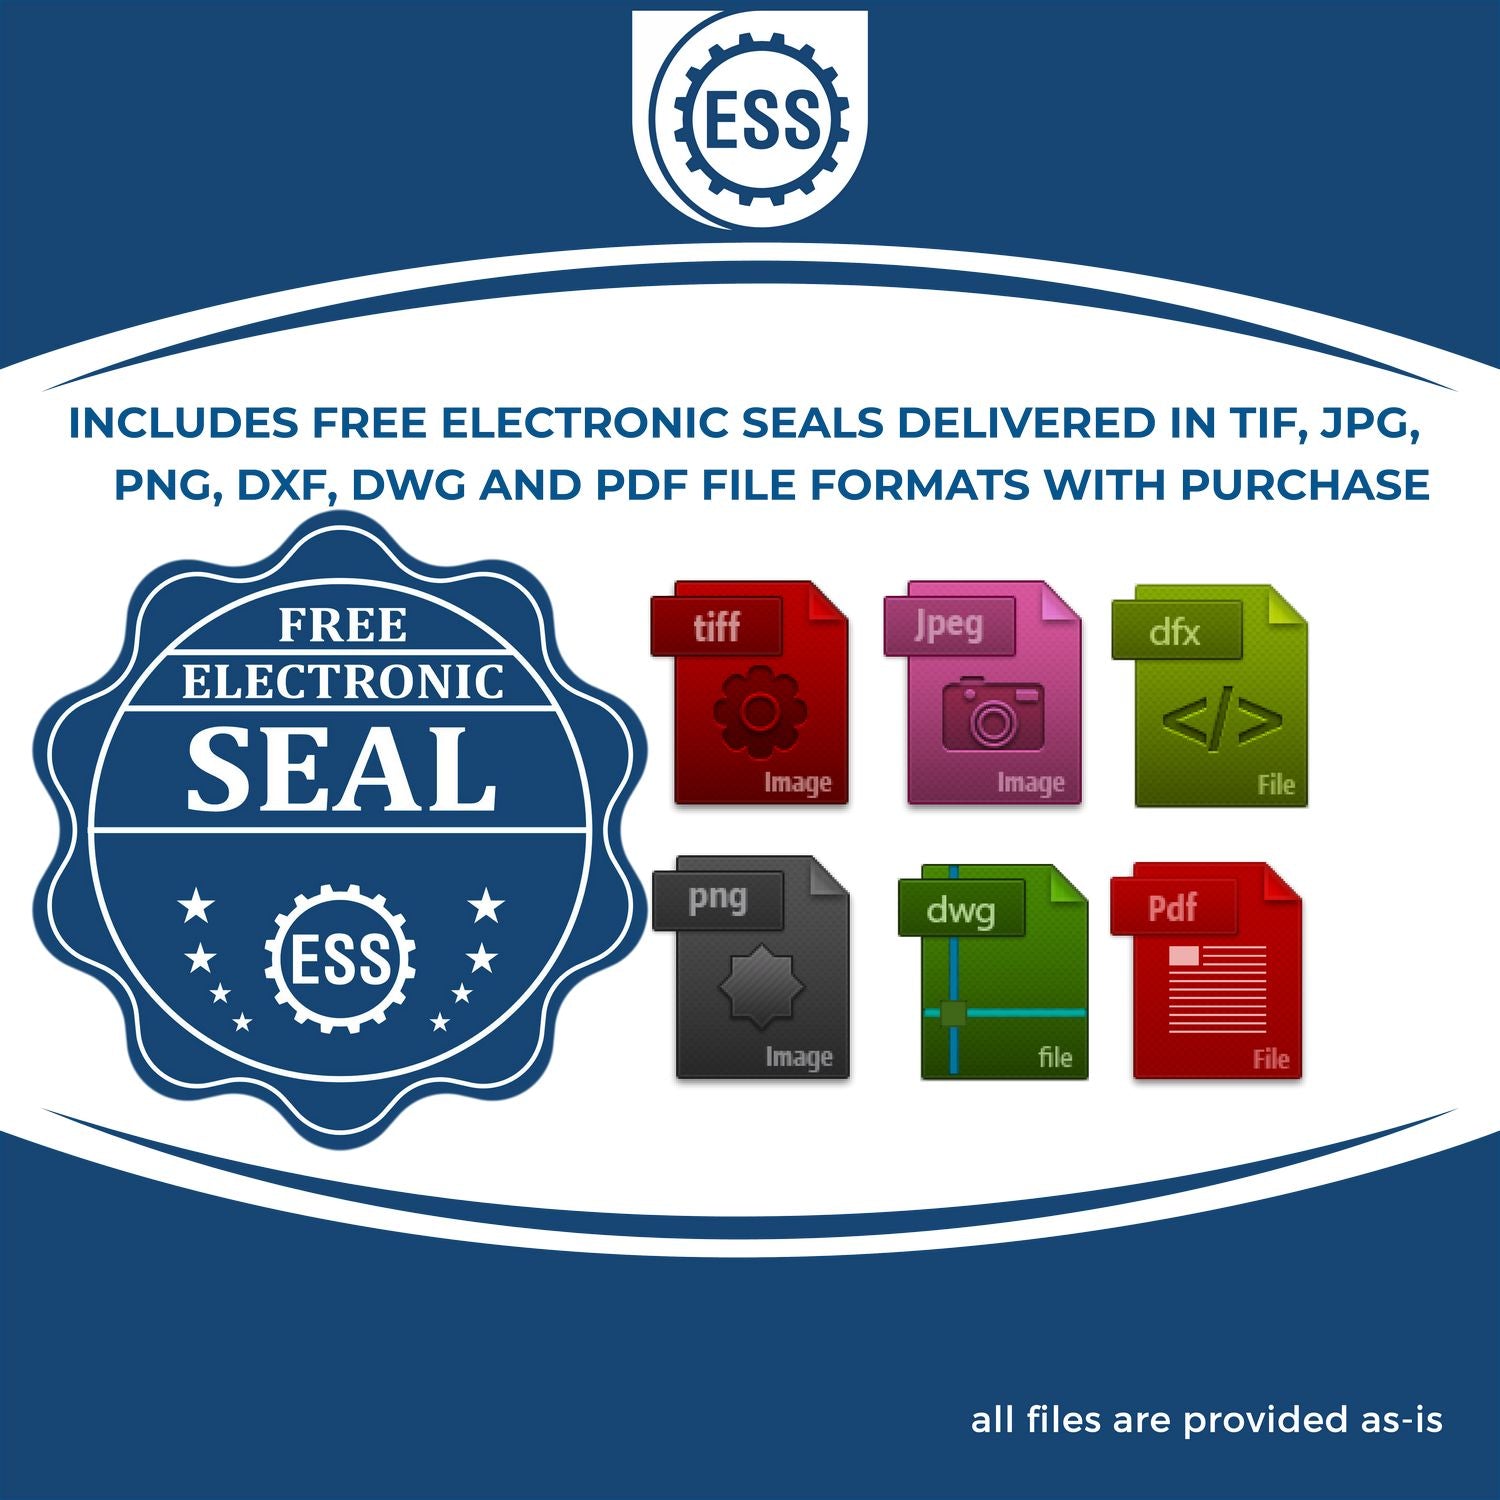 An infographic for the free electronic seal for the Mississippi Professional Geologist Seal Stamp illustrating the different file type icons such as DXF, DWG, TIF, JPG and PNG.